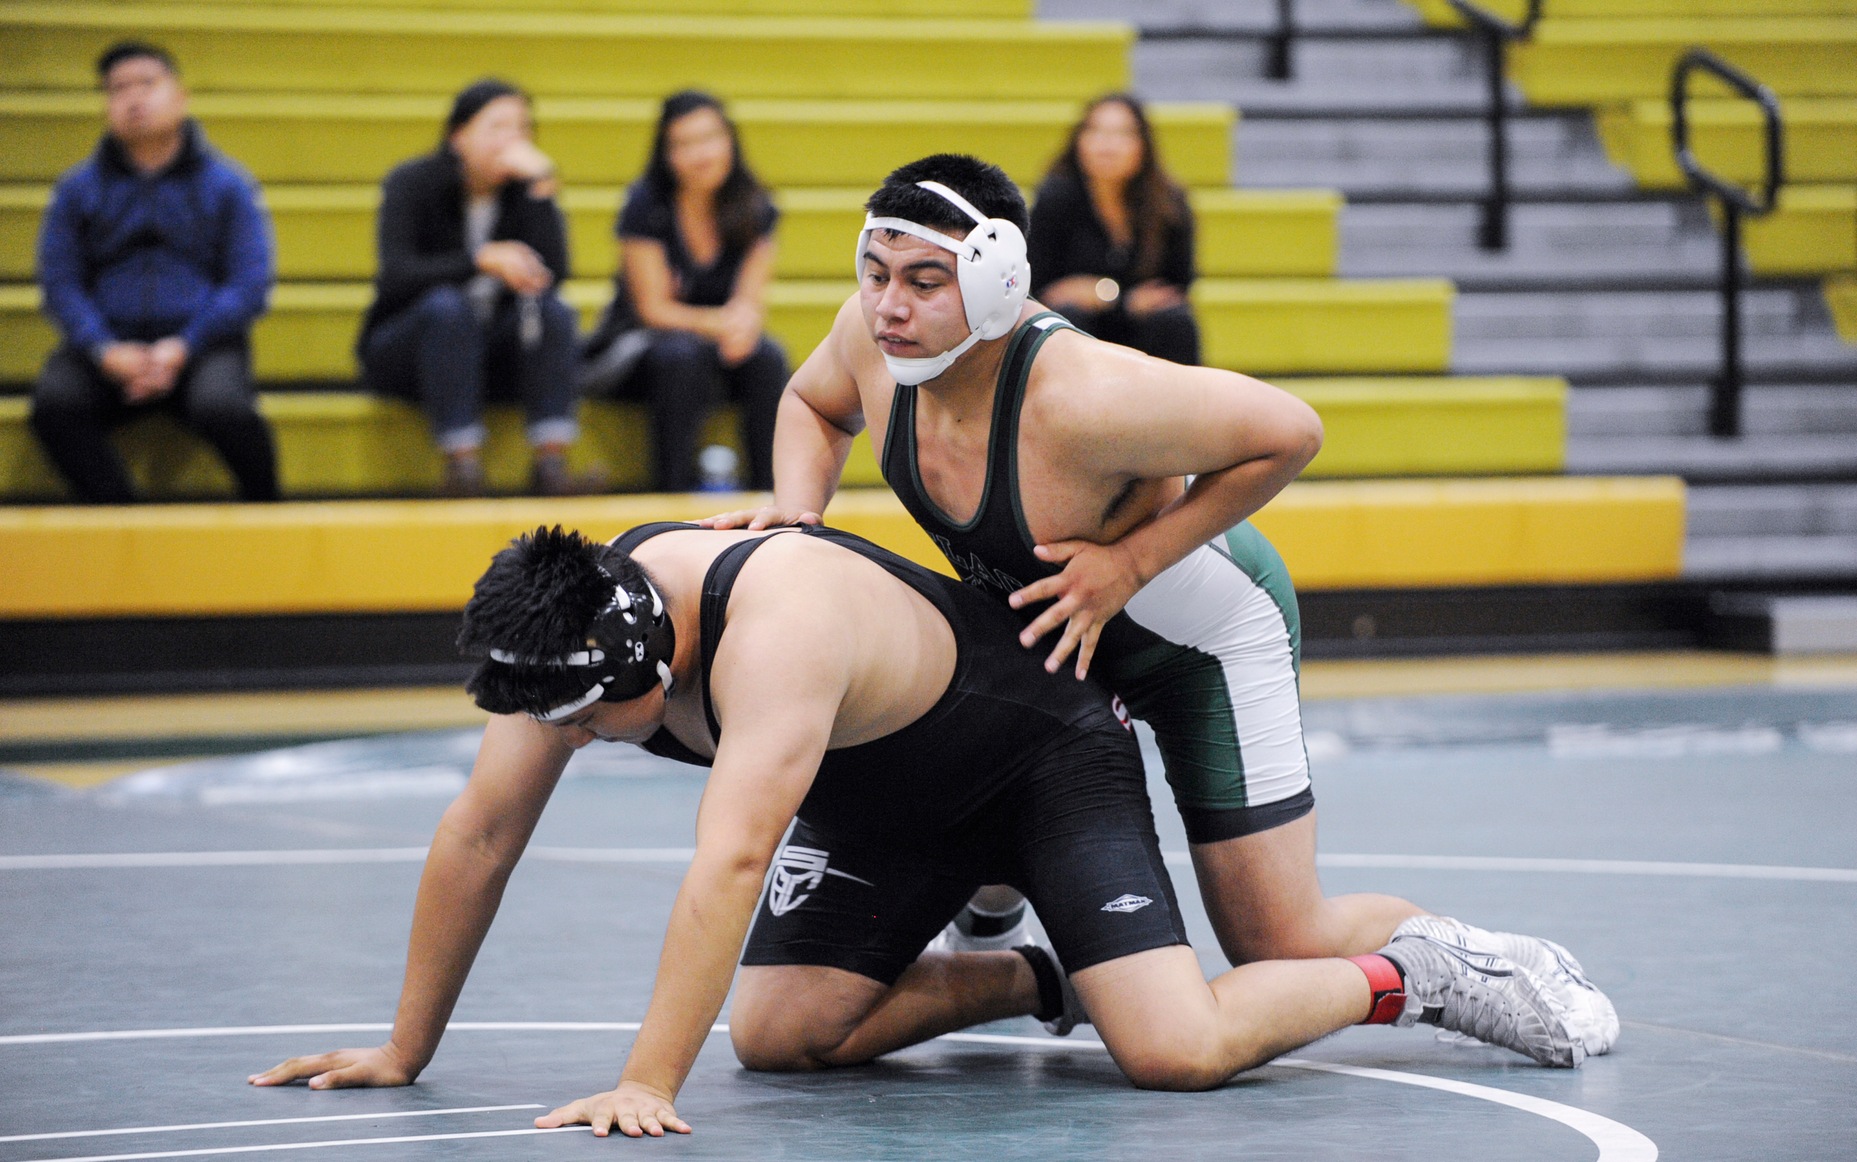 Efren Velez (pictured) wrestles in the CCCAA State Finals, Friday, Dec. 8 at Cerritos College along with Gabriel Rodriguez and Emmanuel Zepeda. (Photo from earlier in the season by Tadzio Garcia).